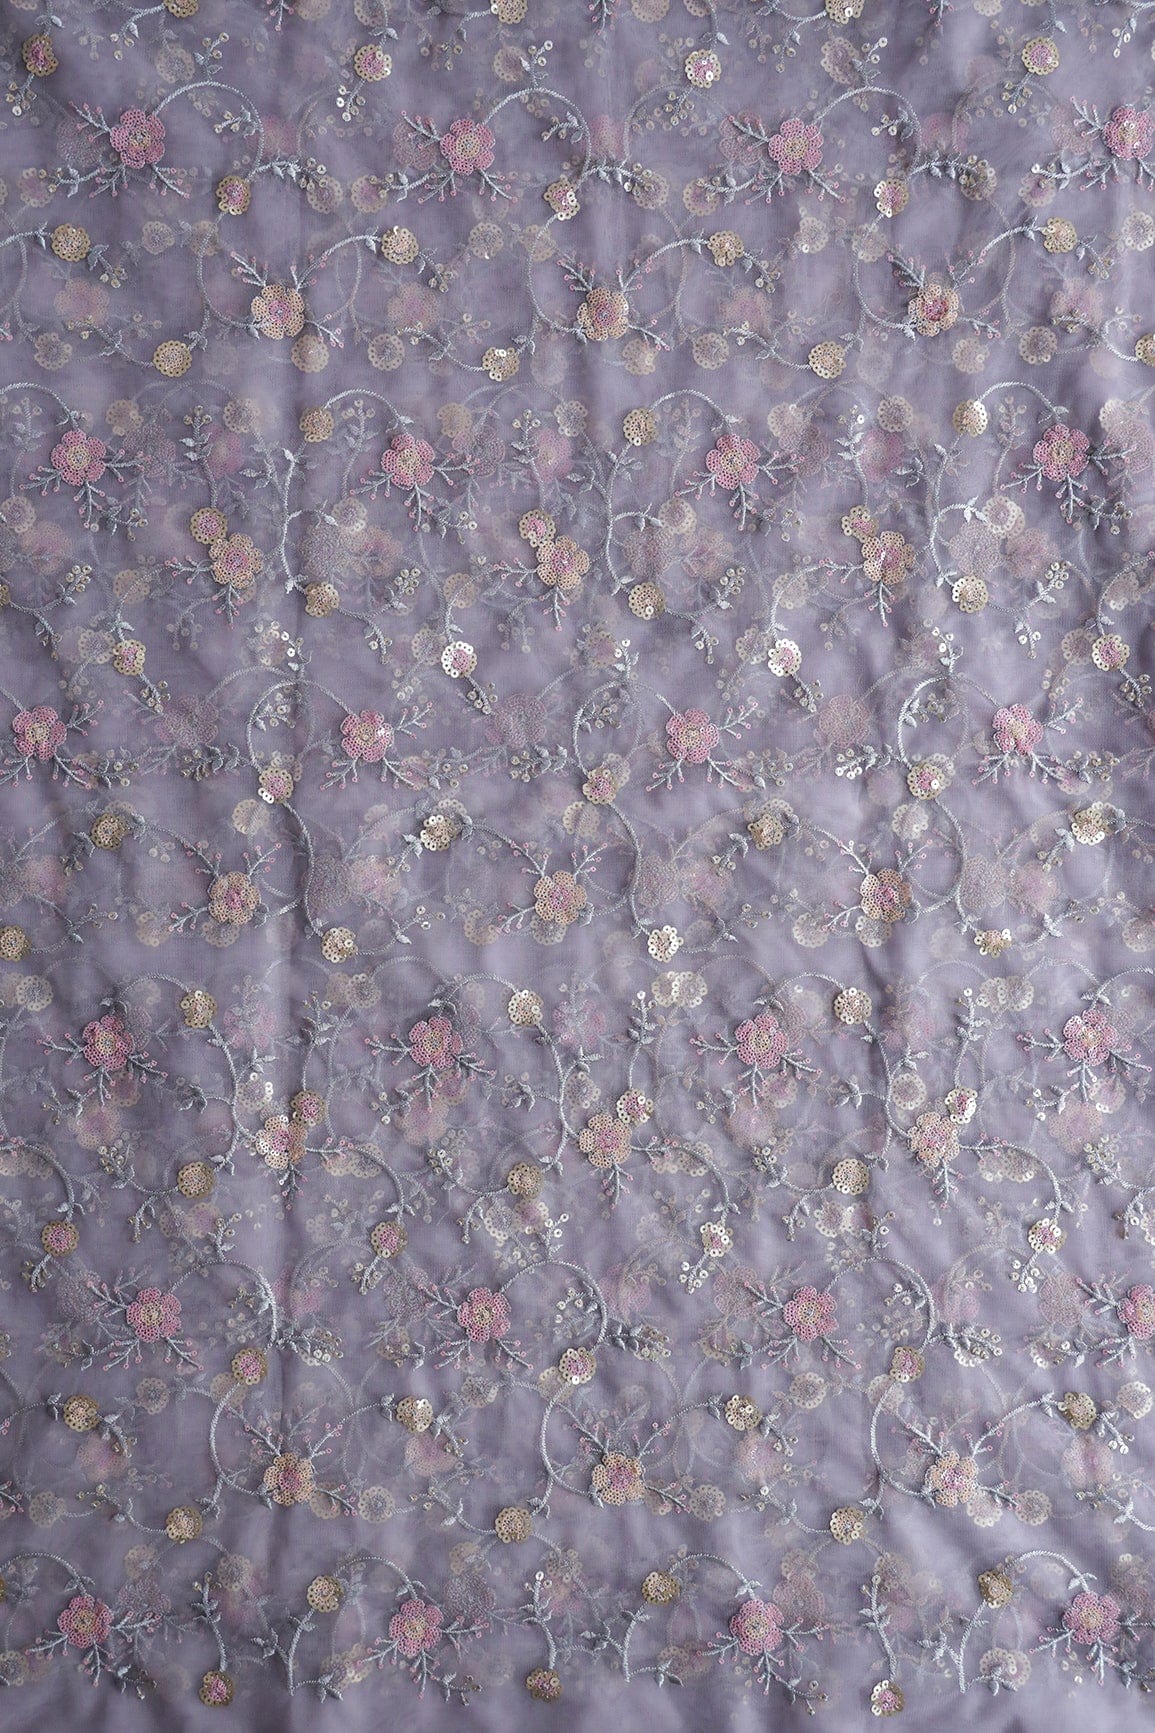 doeraa Embroidery Fabrics Beautiful Multi Color Sequins Floral Embroidery Work On Grey Soft Net Fabric